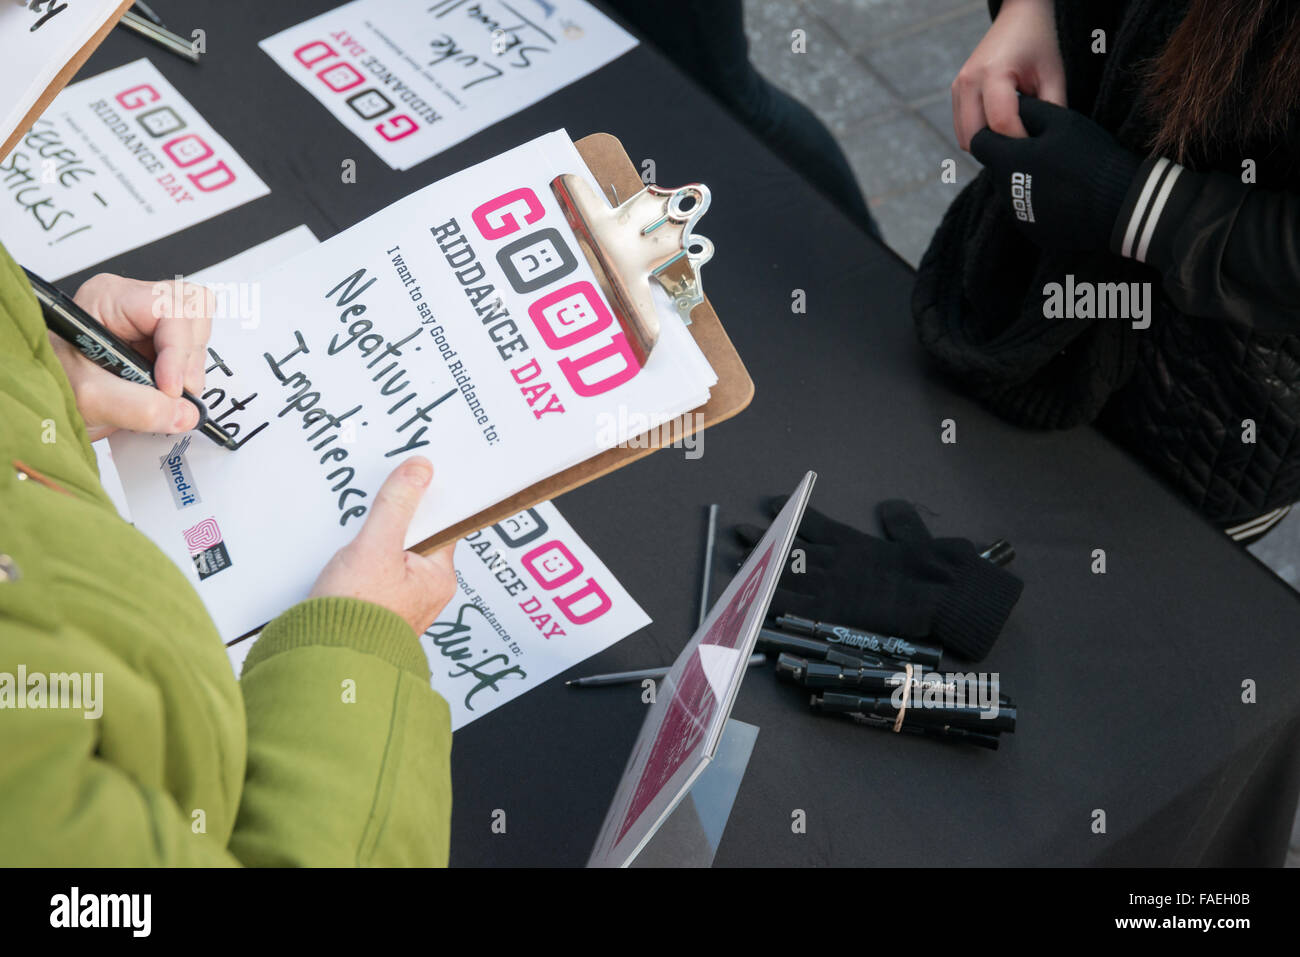 New York, USA. 28th Dec, 2015. A participant from the public writes a 'misfortune' from 2015 on a piece of paper that she will place into the shredder. In advance of the New Year, Times Square Alliance hosted the ninth rendition of its annual 'Good Riddance Day,' where the public is invited to symbolically shred letters, photos, or written messages conveying unpleasant memories from 2015. Hosted by media personality Alison Hagendorf and featuring brief comments by Times Square Alliance President Tim Tompkins, the event, sponsored by the document destruction company Shred-It, drew hundreds of p Stock Photo